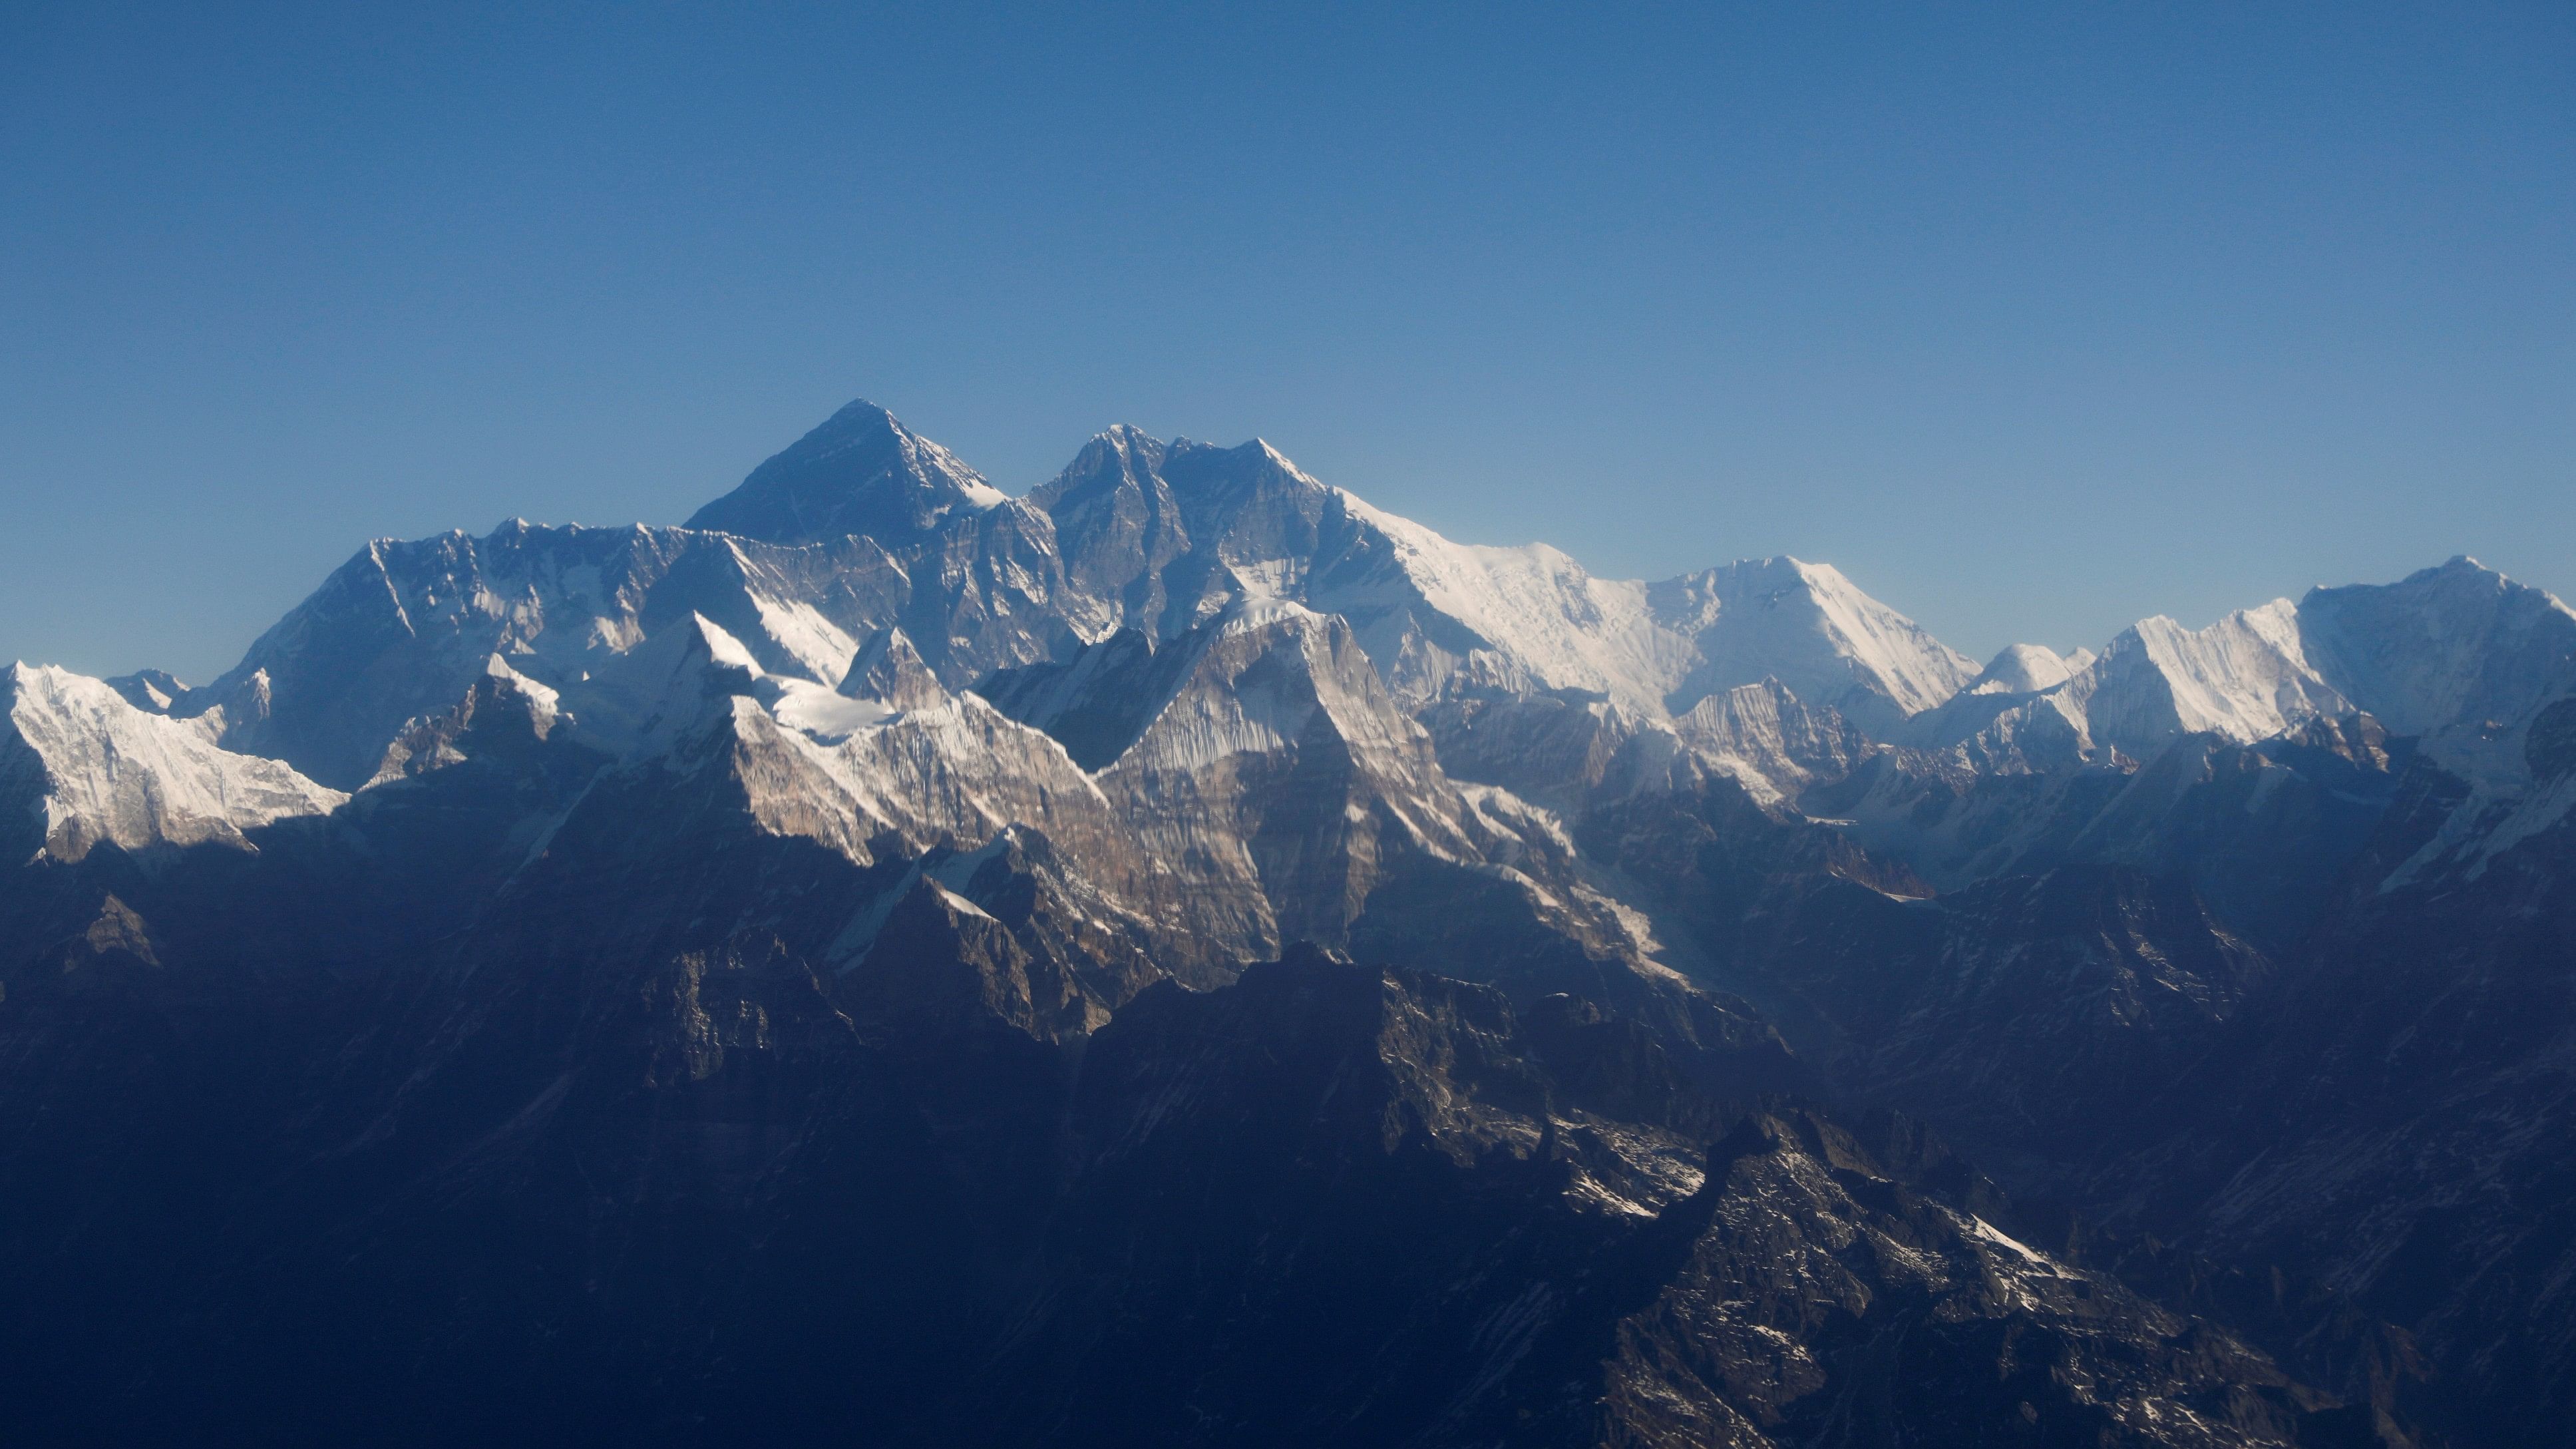 <div class="paragraphs"><p>Mount Everest, the world highest peak, and other peaks of the Himalayan range are seen through an aircraft window during a mountain flight from Kathmandu.&nbsp;</p></div>